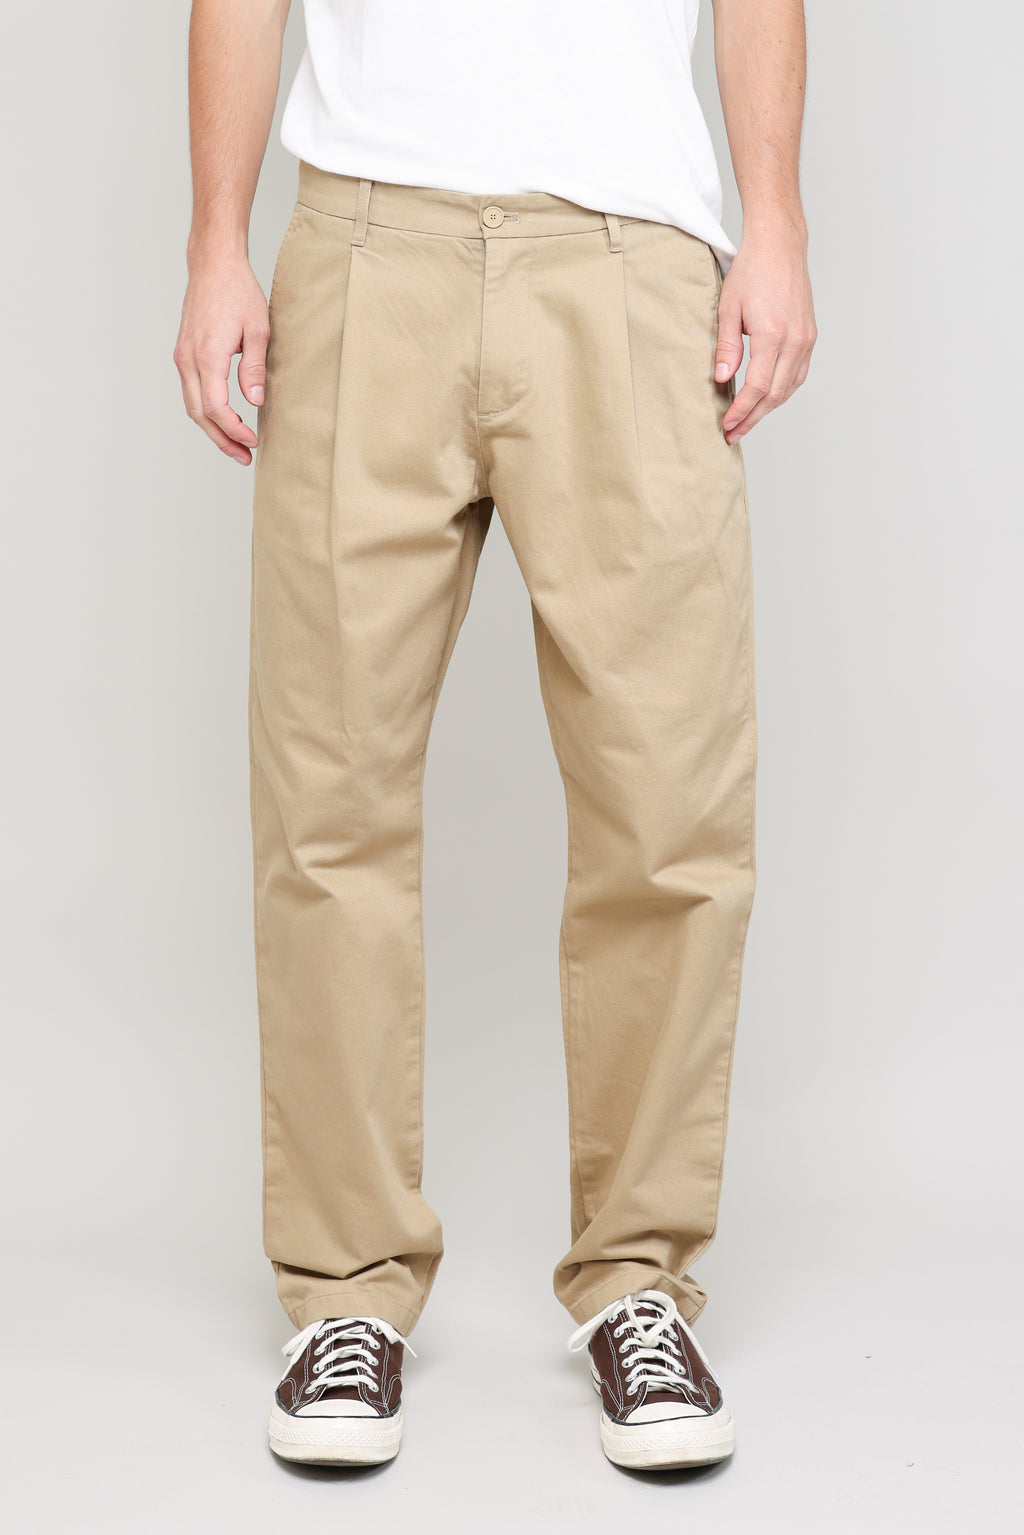 Pleated Chino Vintage French Drill in Khaki 01